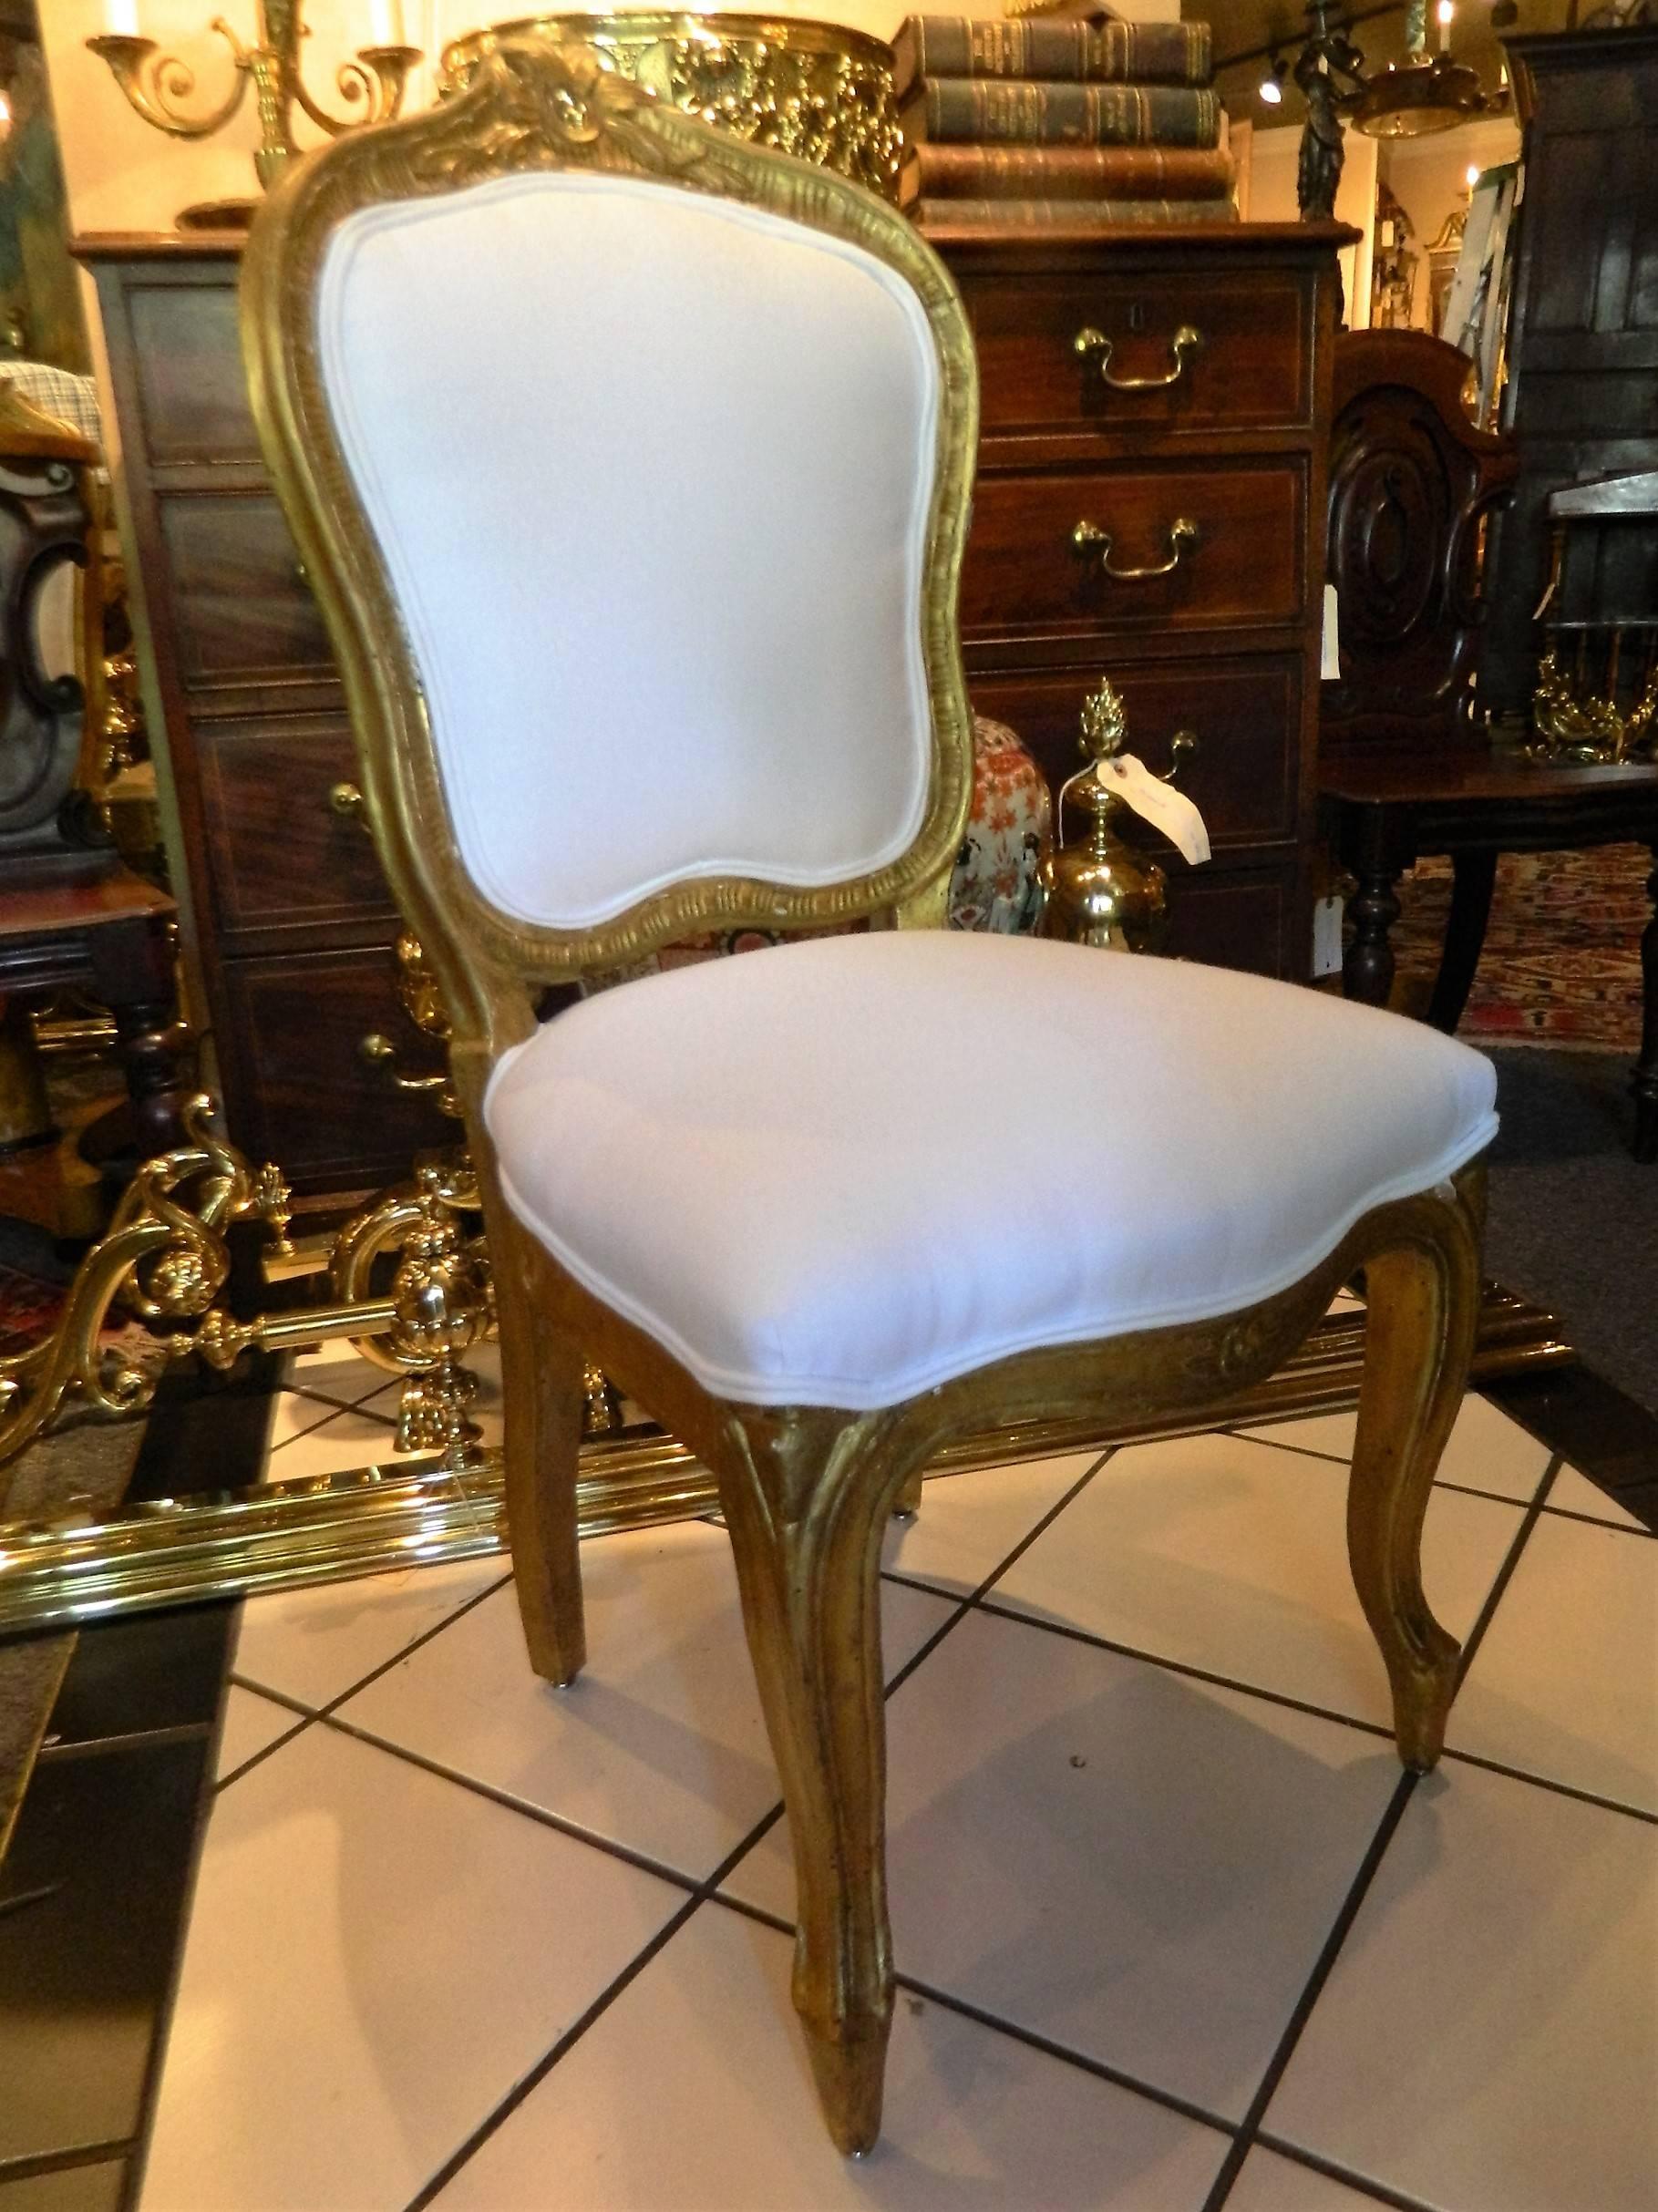 Set of eight Louis XV style giltwood side chairs, early 19th century. Upholstered in off-white muslin.